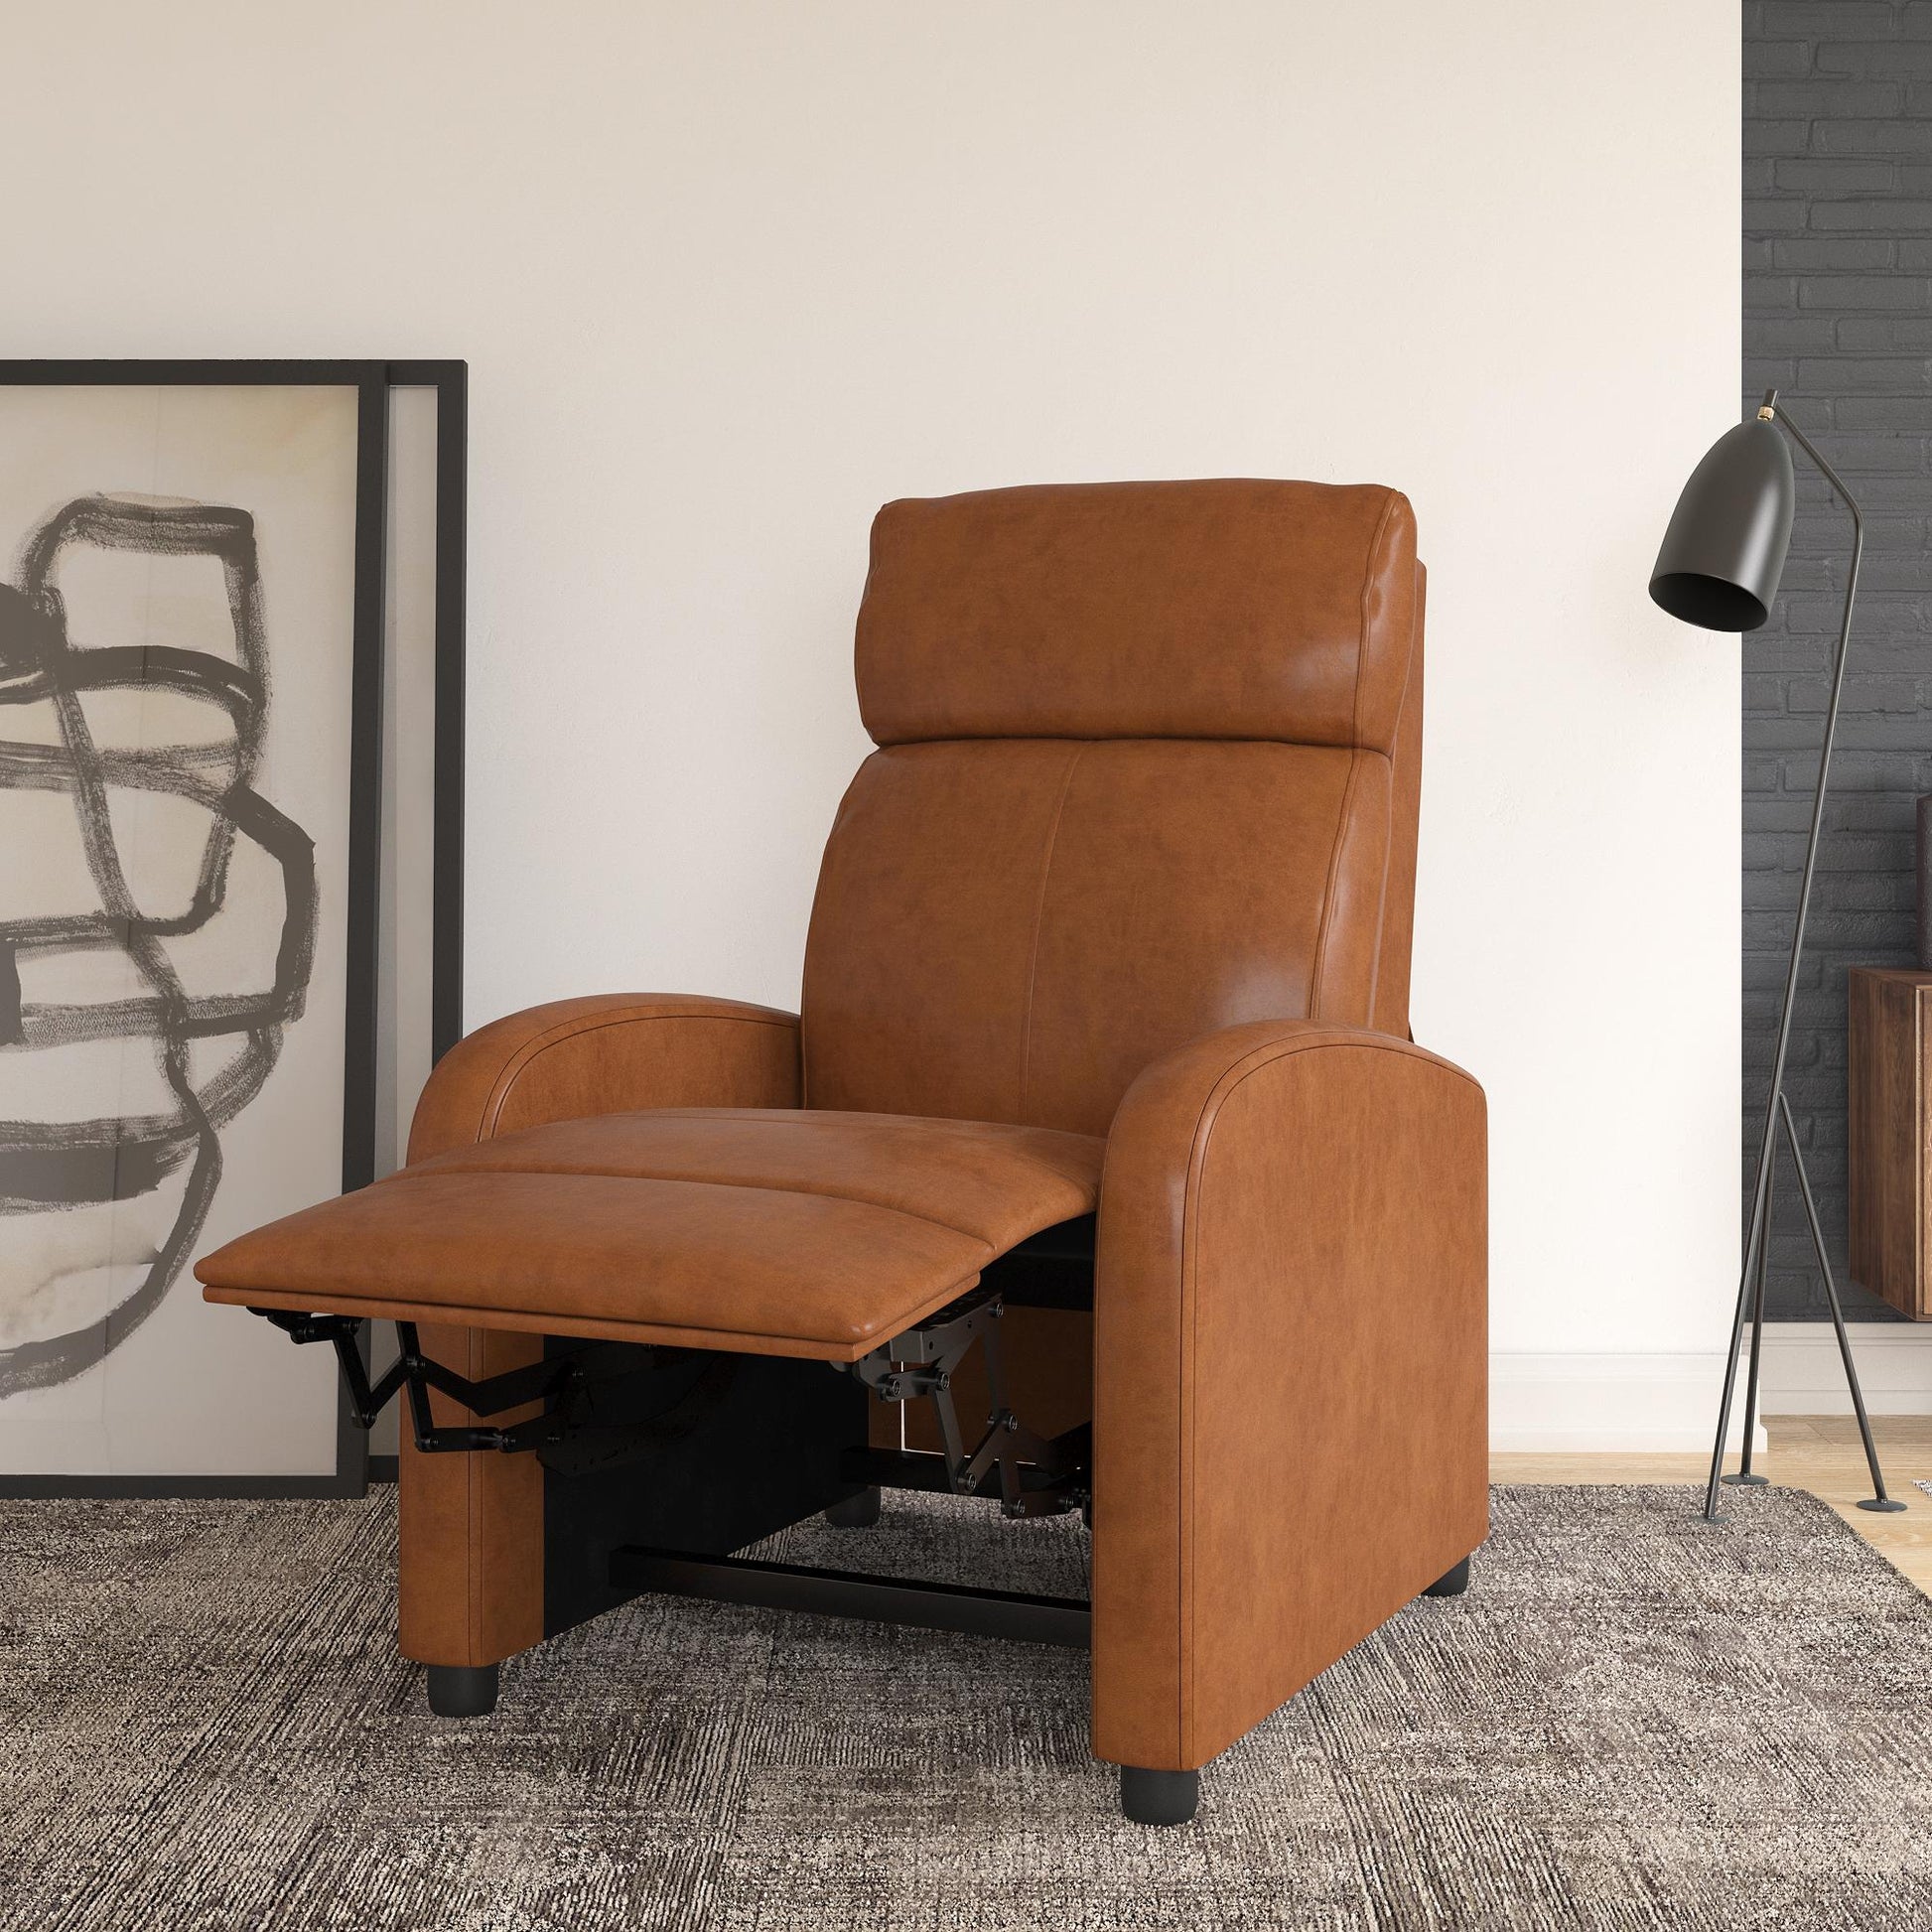 Moby Pushback Recliner Chair with Multiple Reclining Positions - Camel